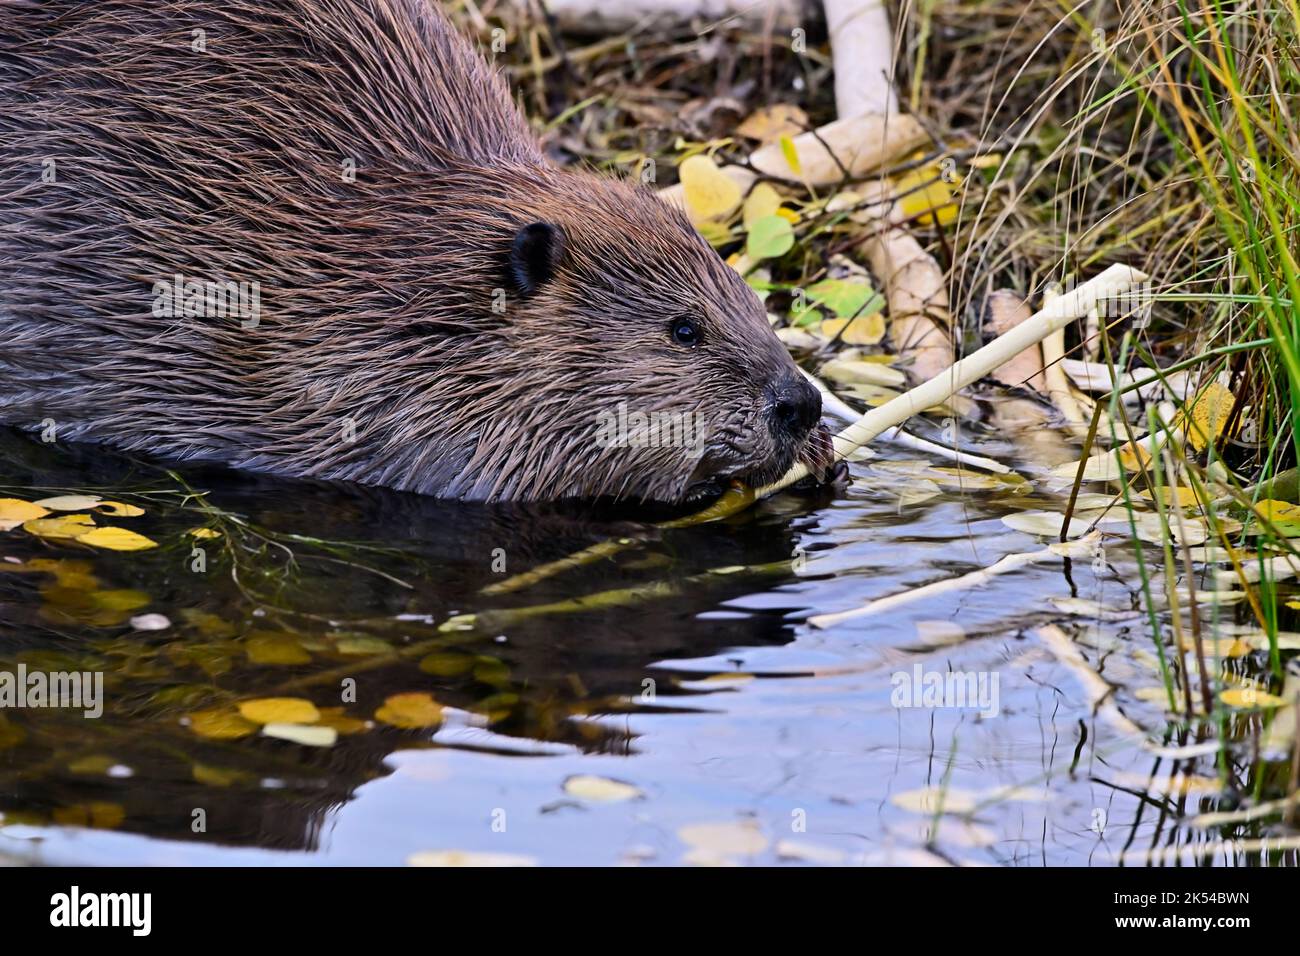 A Canadian Beaver 'Castor canadensis', feeding on bark from an aspen tree branch in rural Alberta Canada Stock Photo